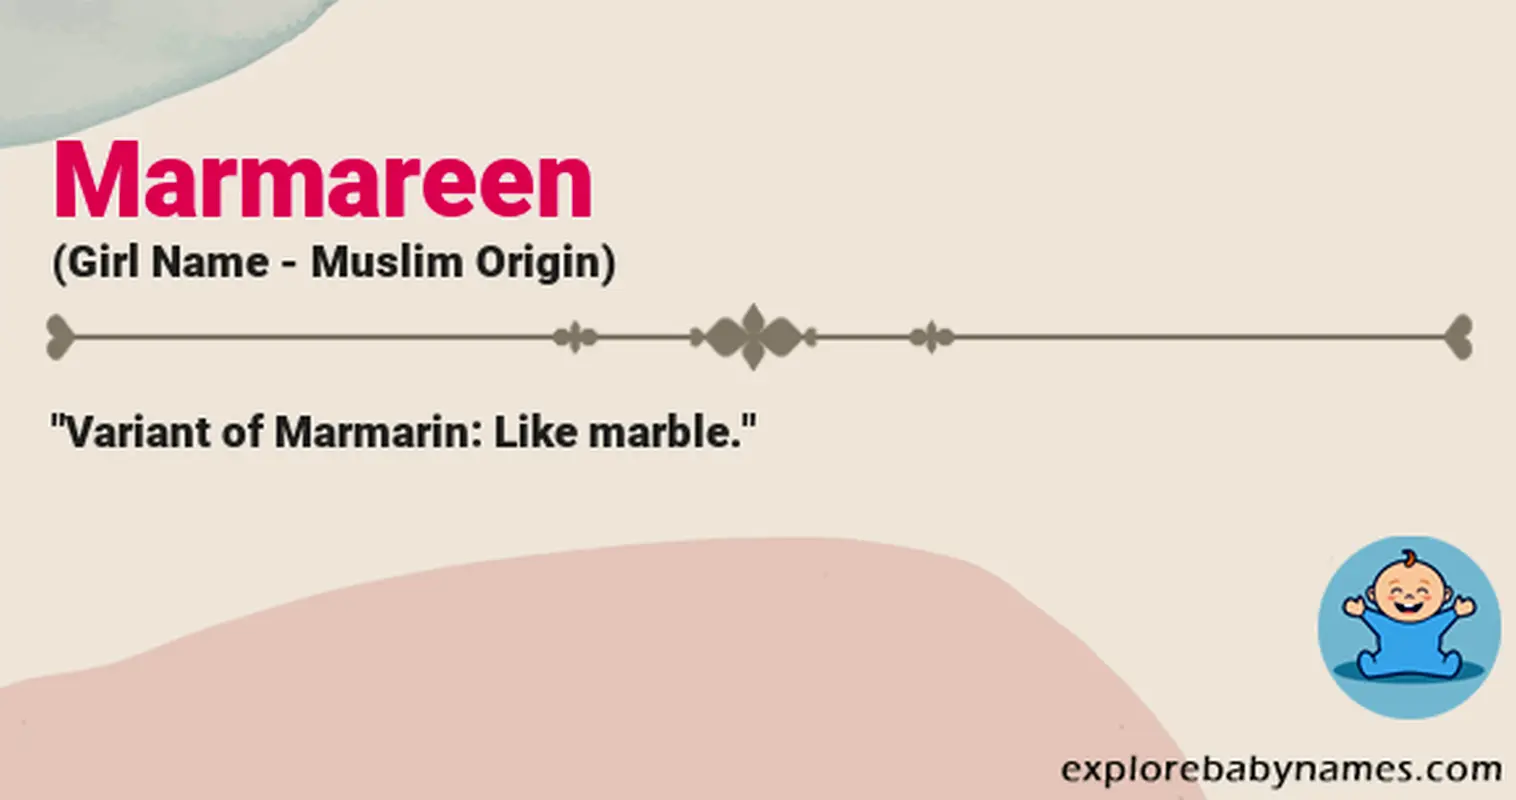 Meaning of Marmareen